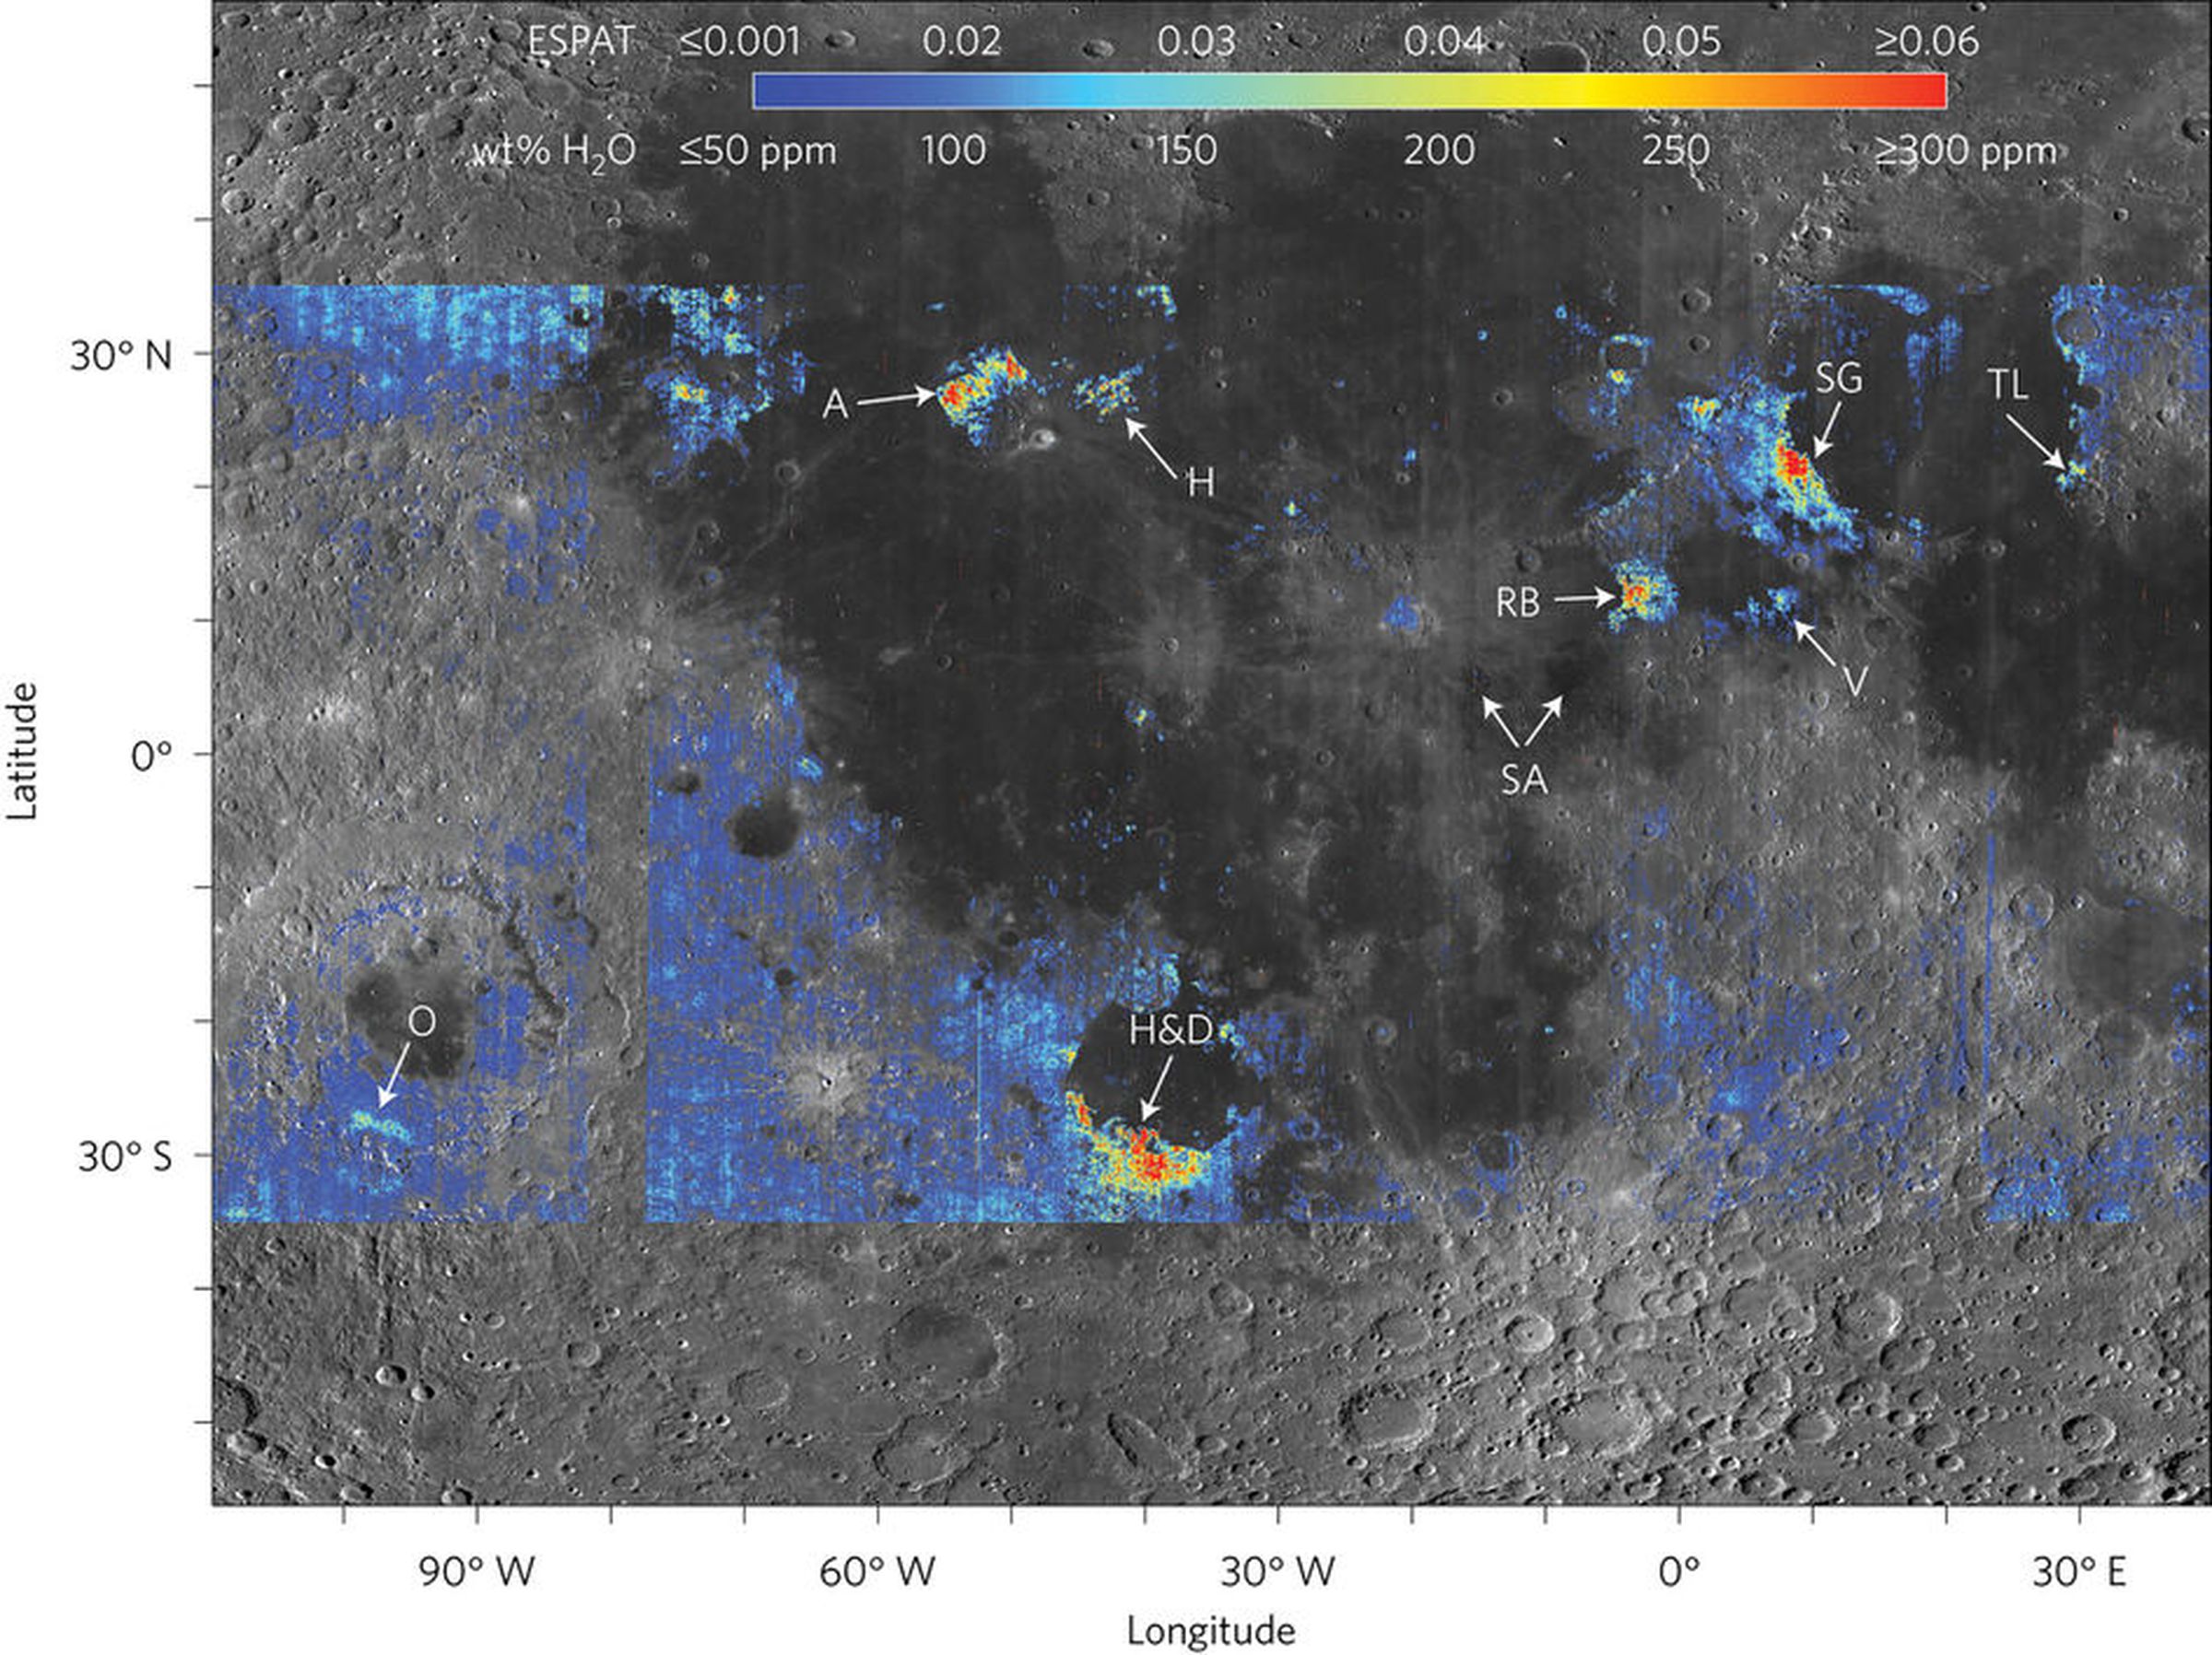 This map shows where the water-rich deposits are on the surface of the Moon.